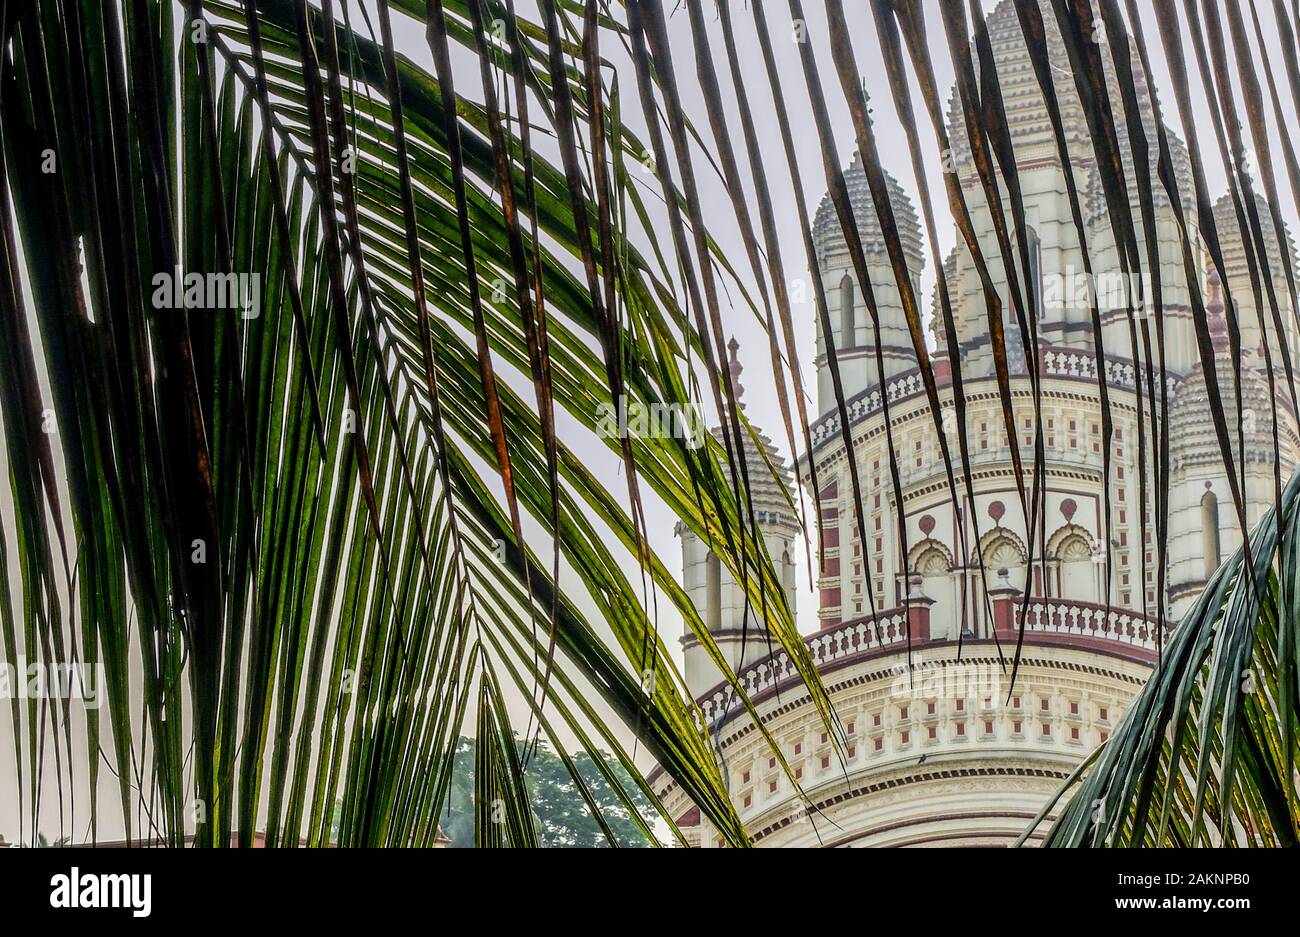 KOLKATA,WEST BENGAL/INDIA-MARCH 22 2018:Dakshineswar Kali Temple with palm leaves in focus in the foreground. Stock Photo